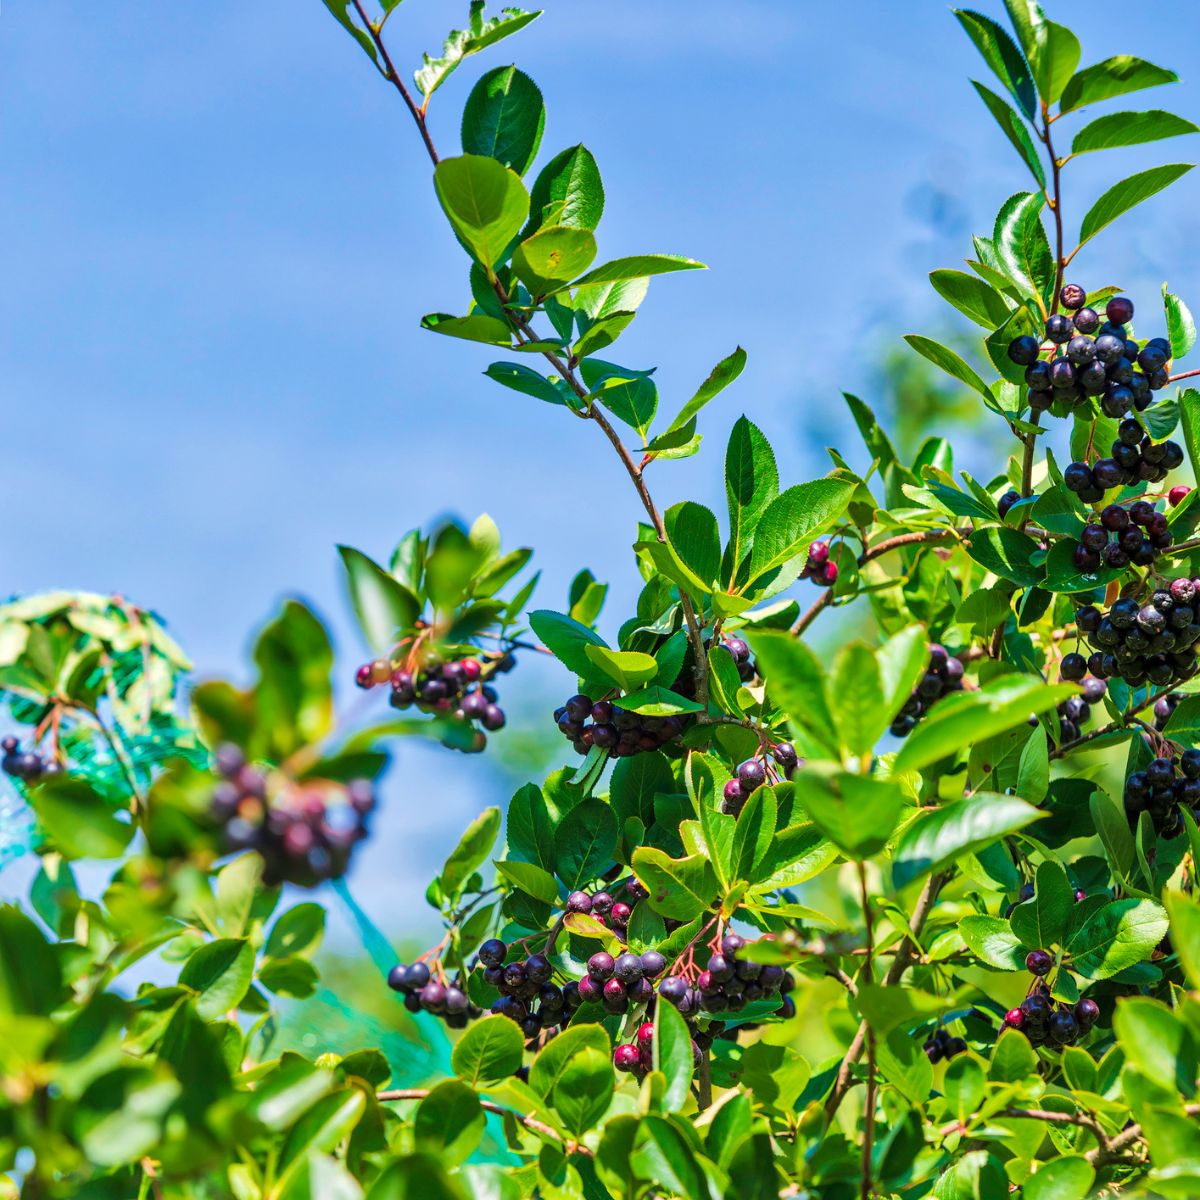 Next spring, plant a 'holiday berry patch' with white, red and purple  berries